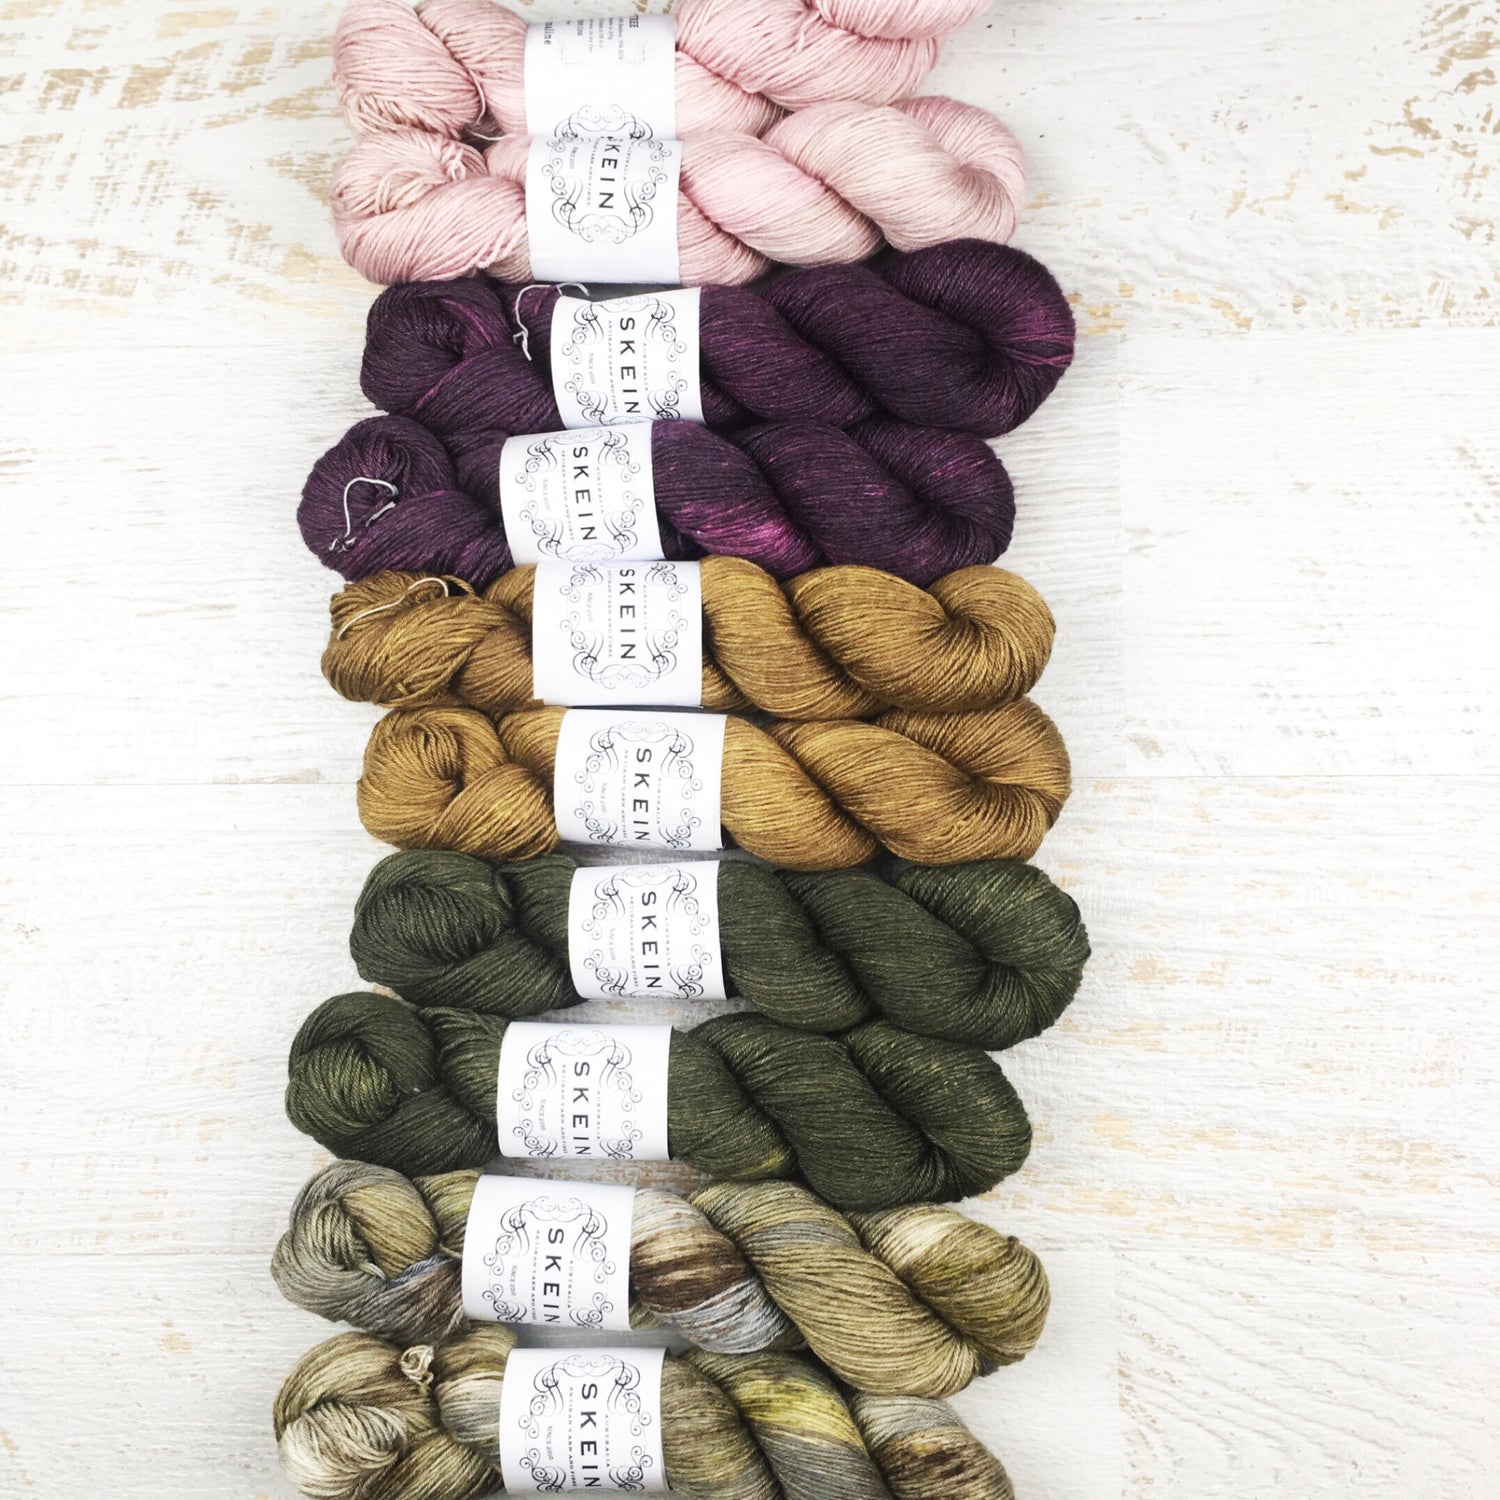 Daintree In Stock and Pre Order Bliss DK - Friday 21st June